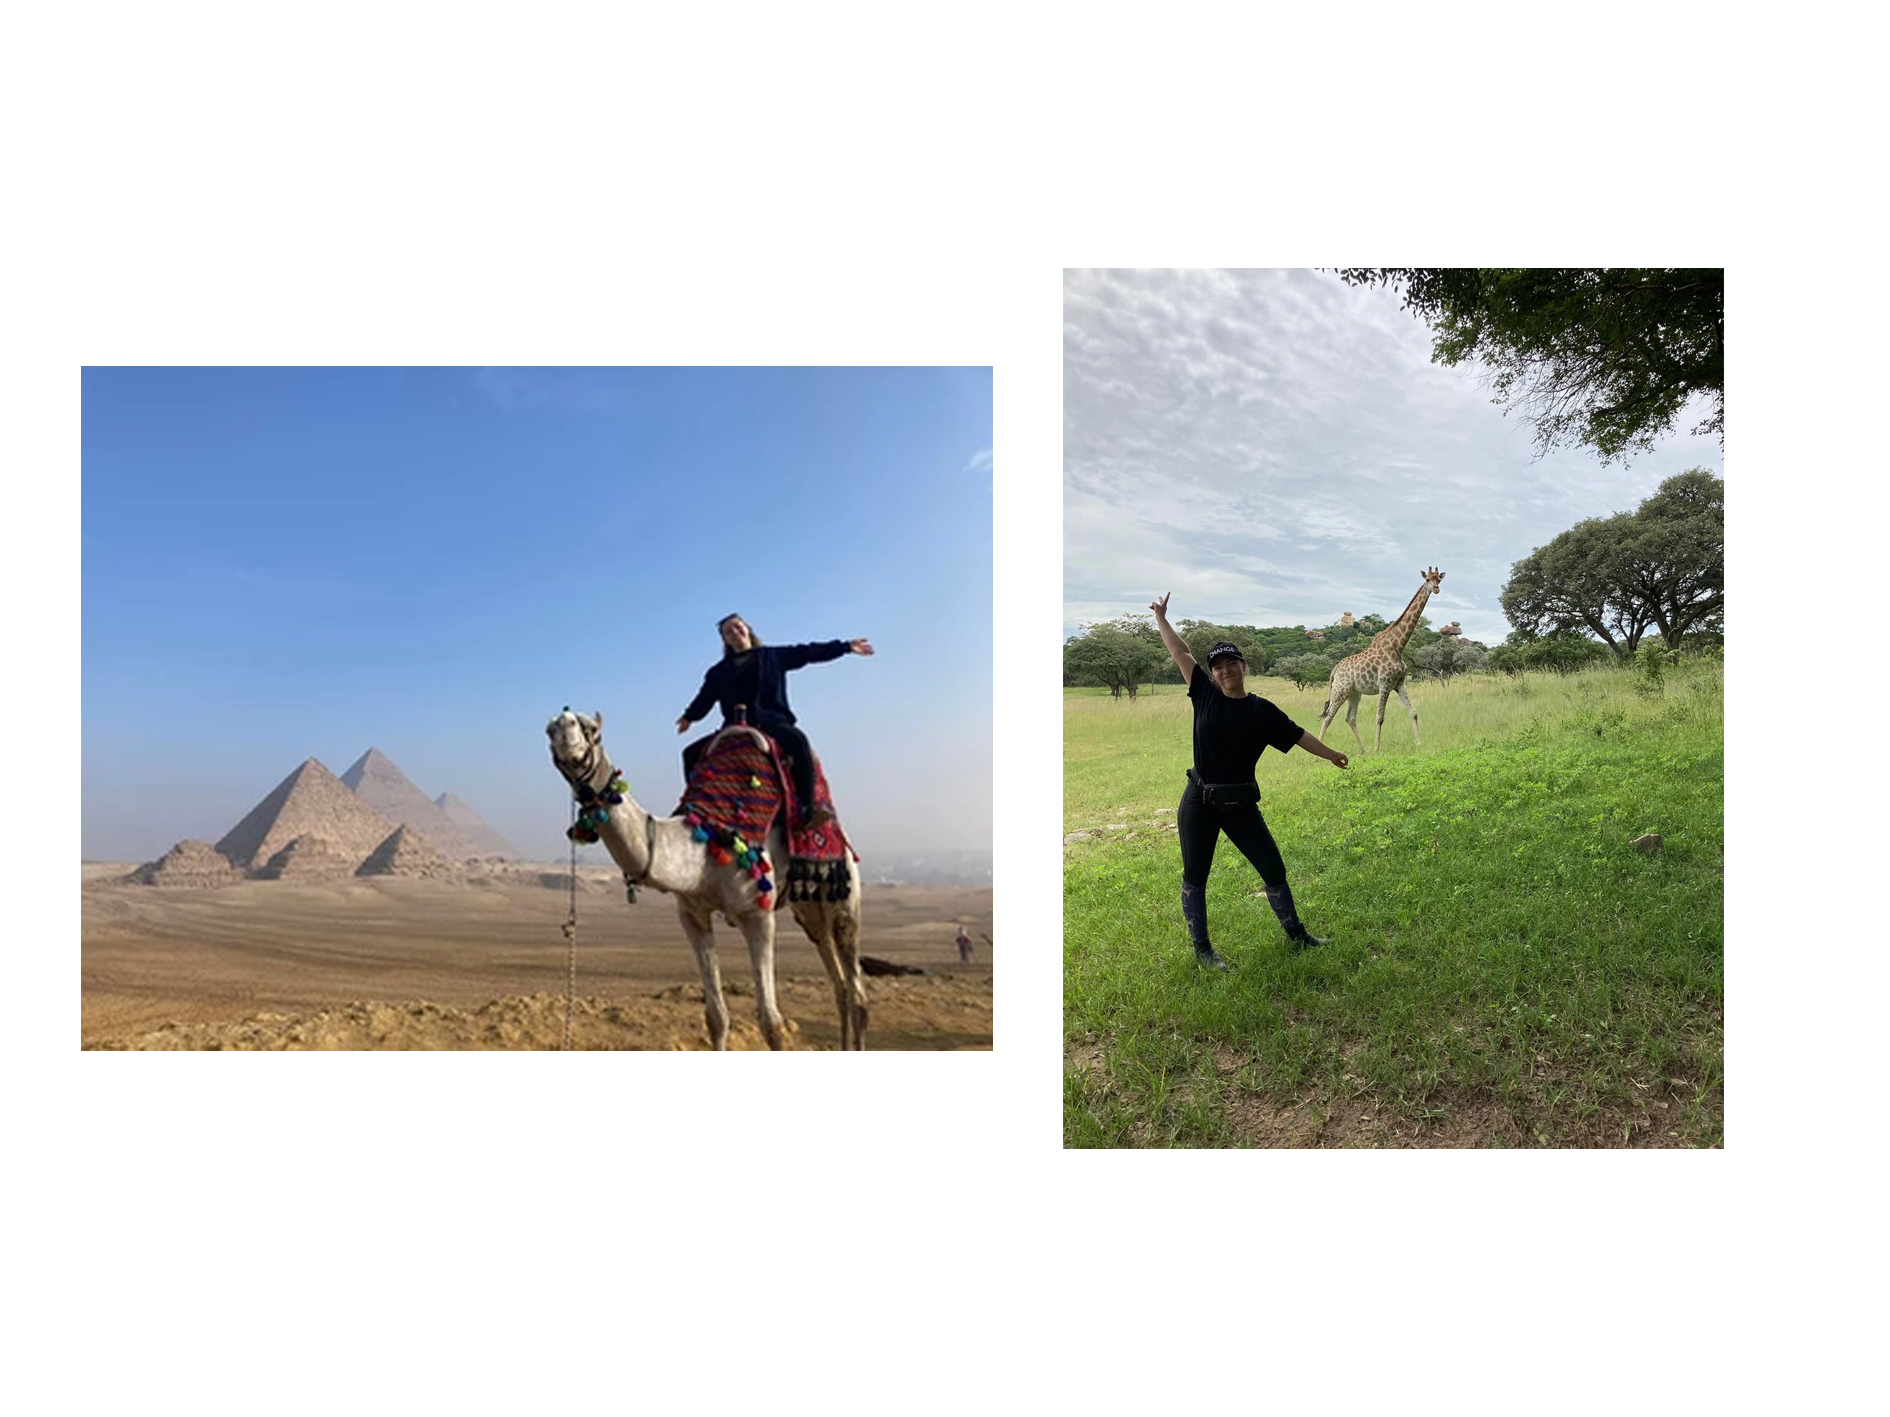 Tine on a camel and with giraffes